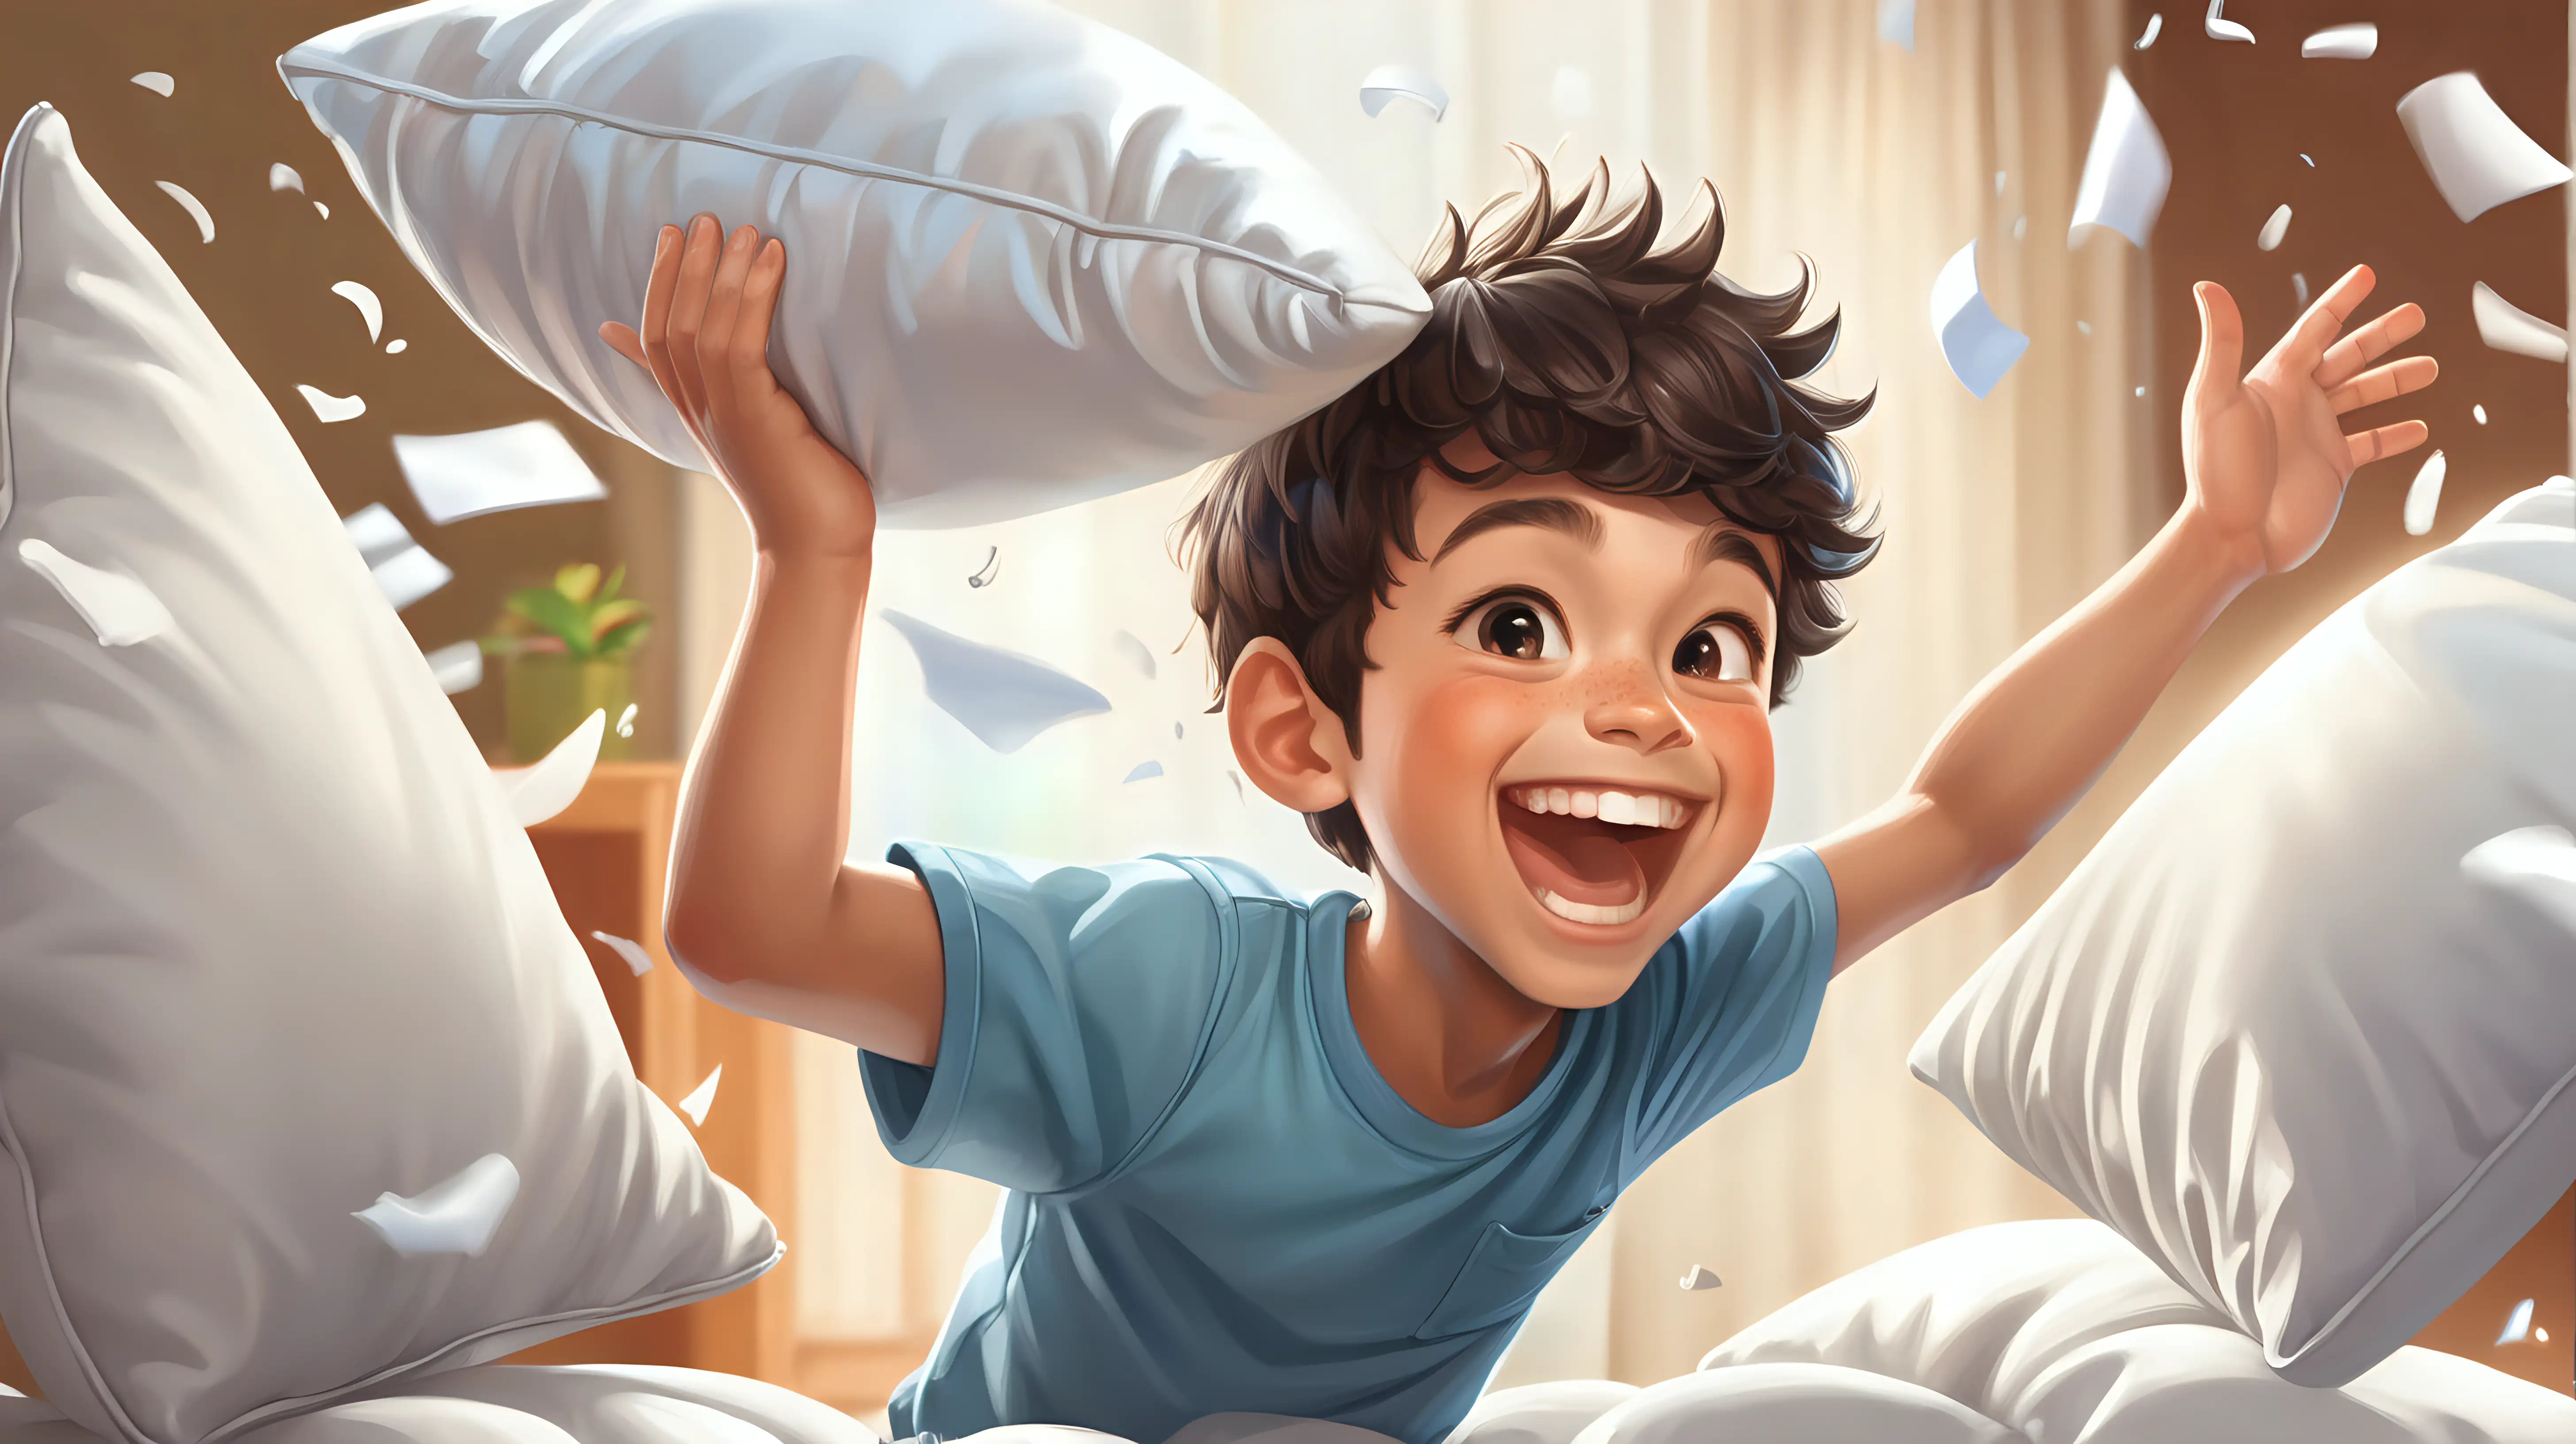 Joyful Pillow Fight Playful Boy Laughter in Action